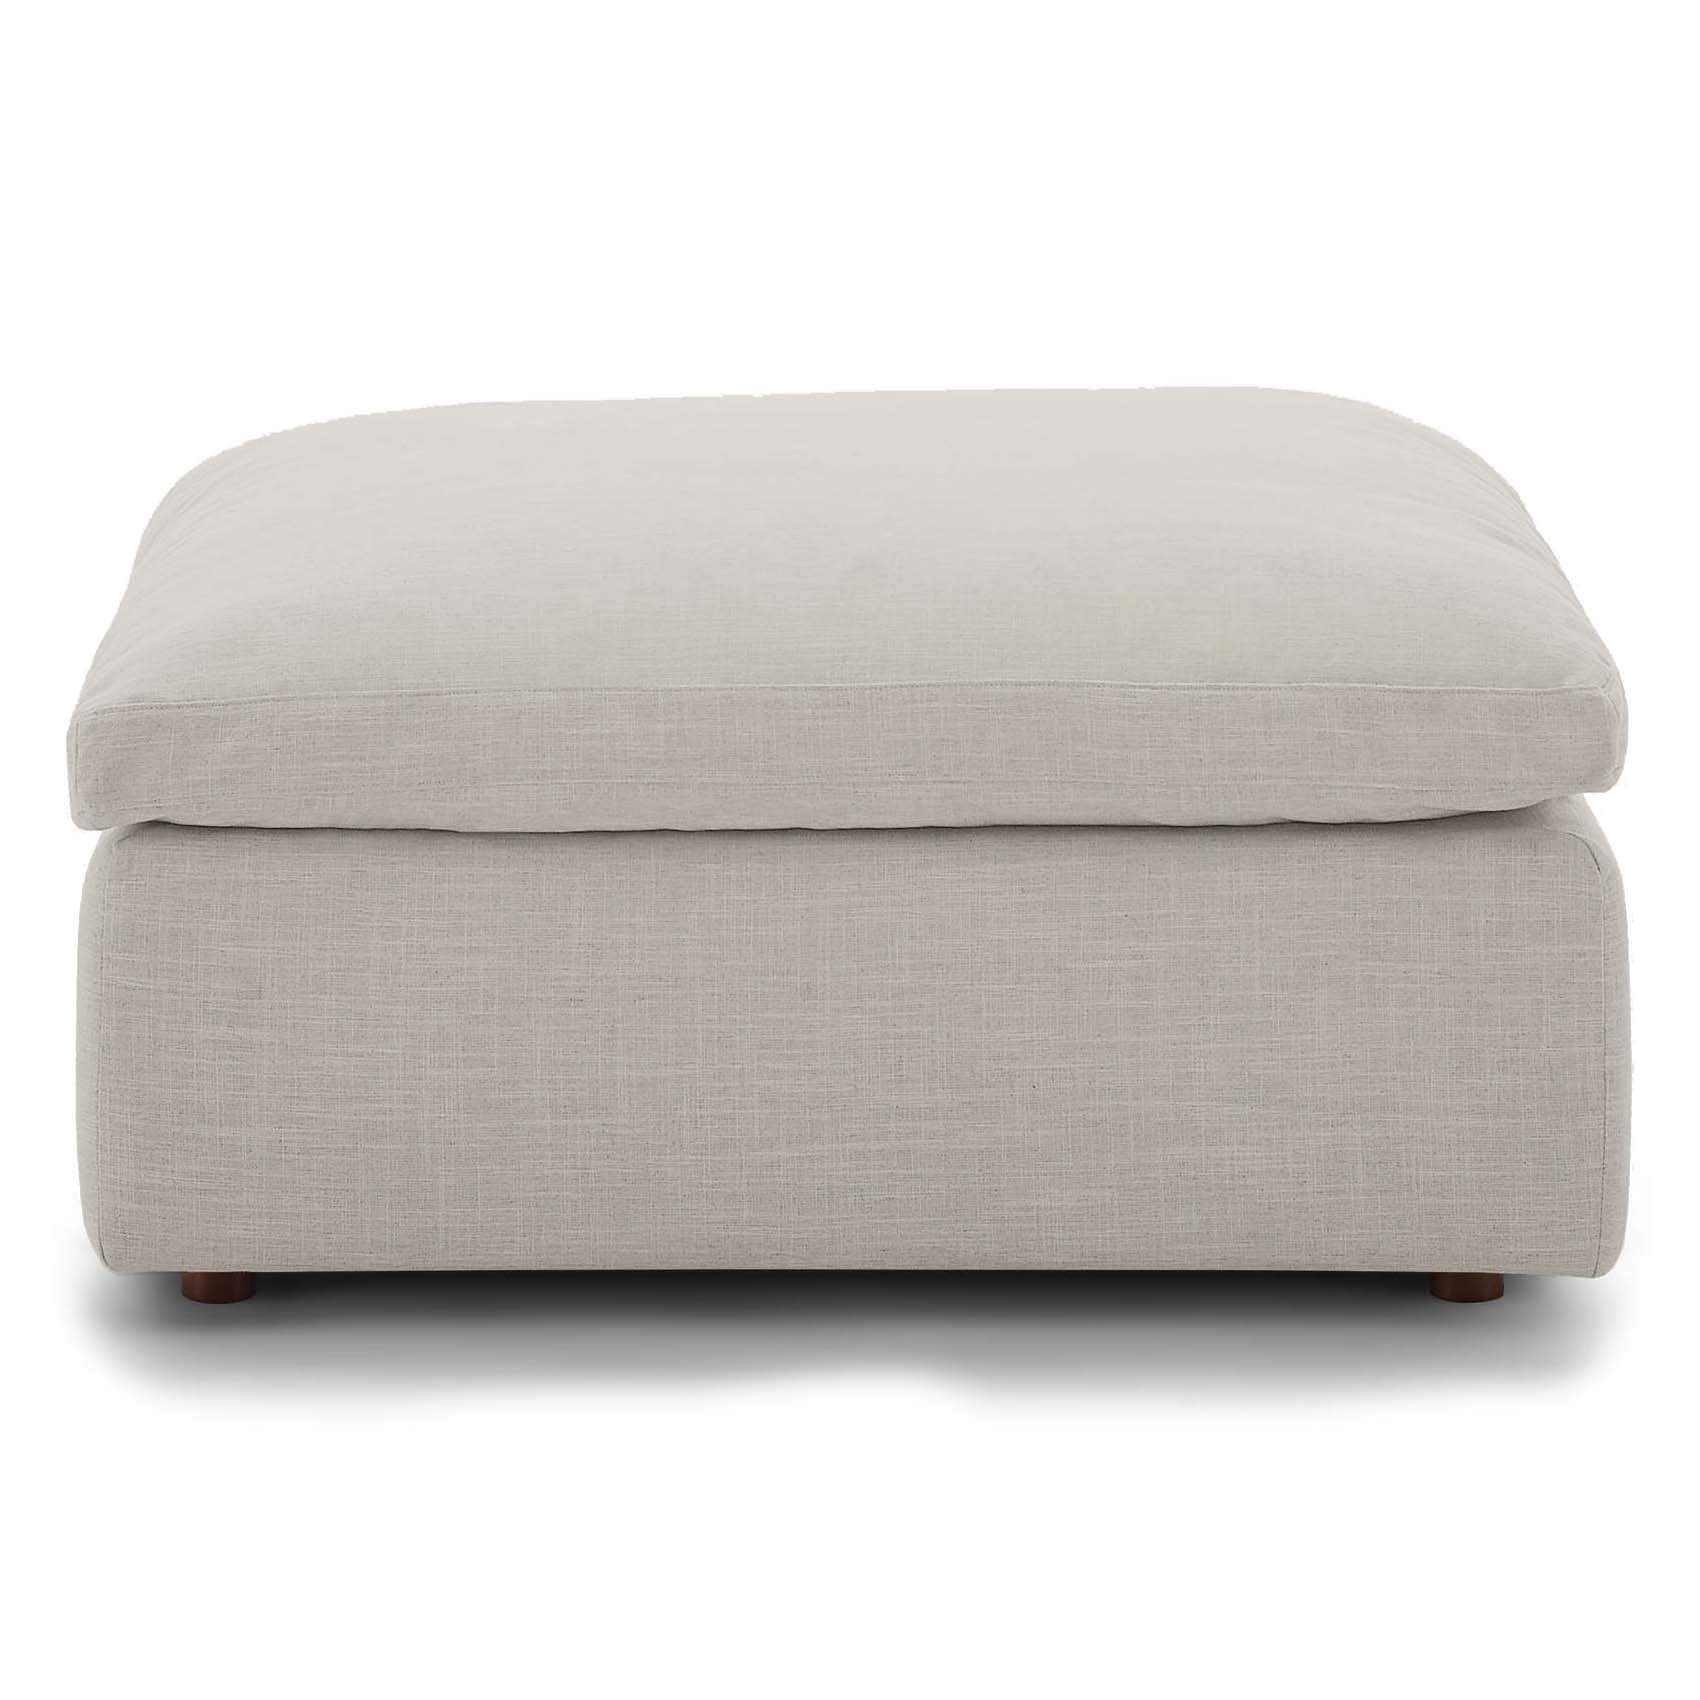 Commix Down-Filled Ottoman by Modway - Beige | Homethreads